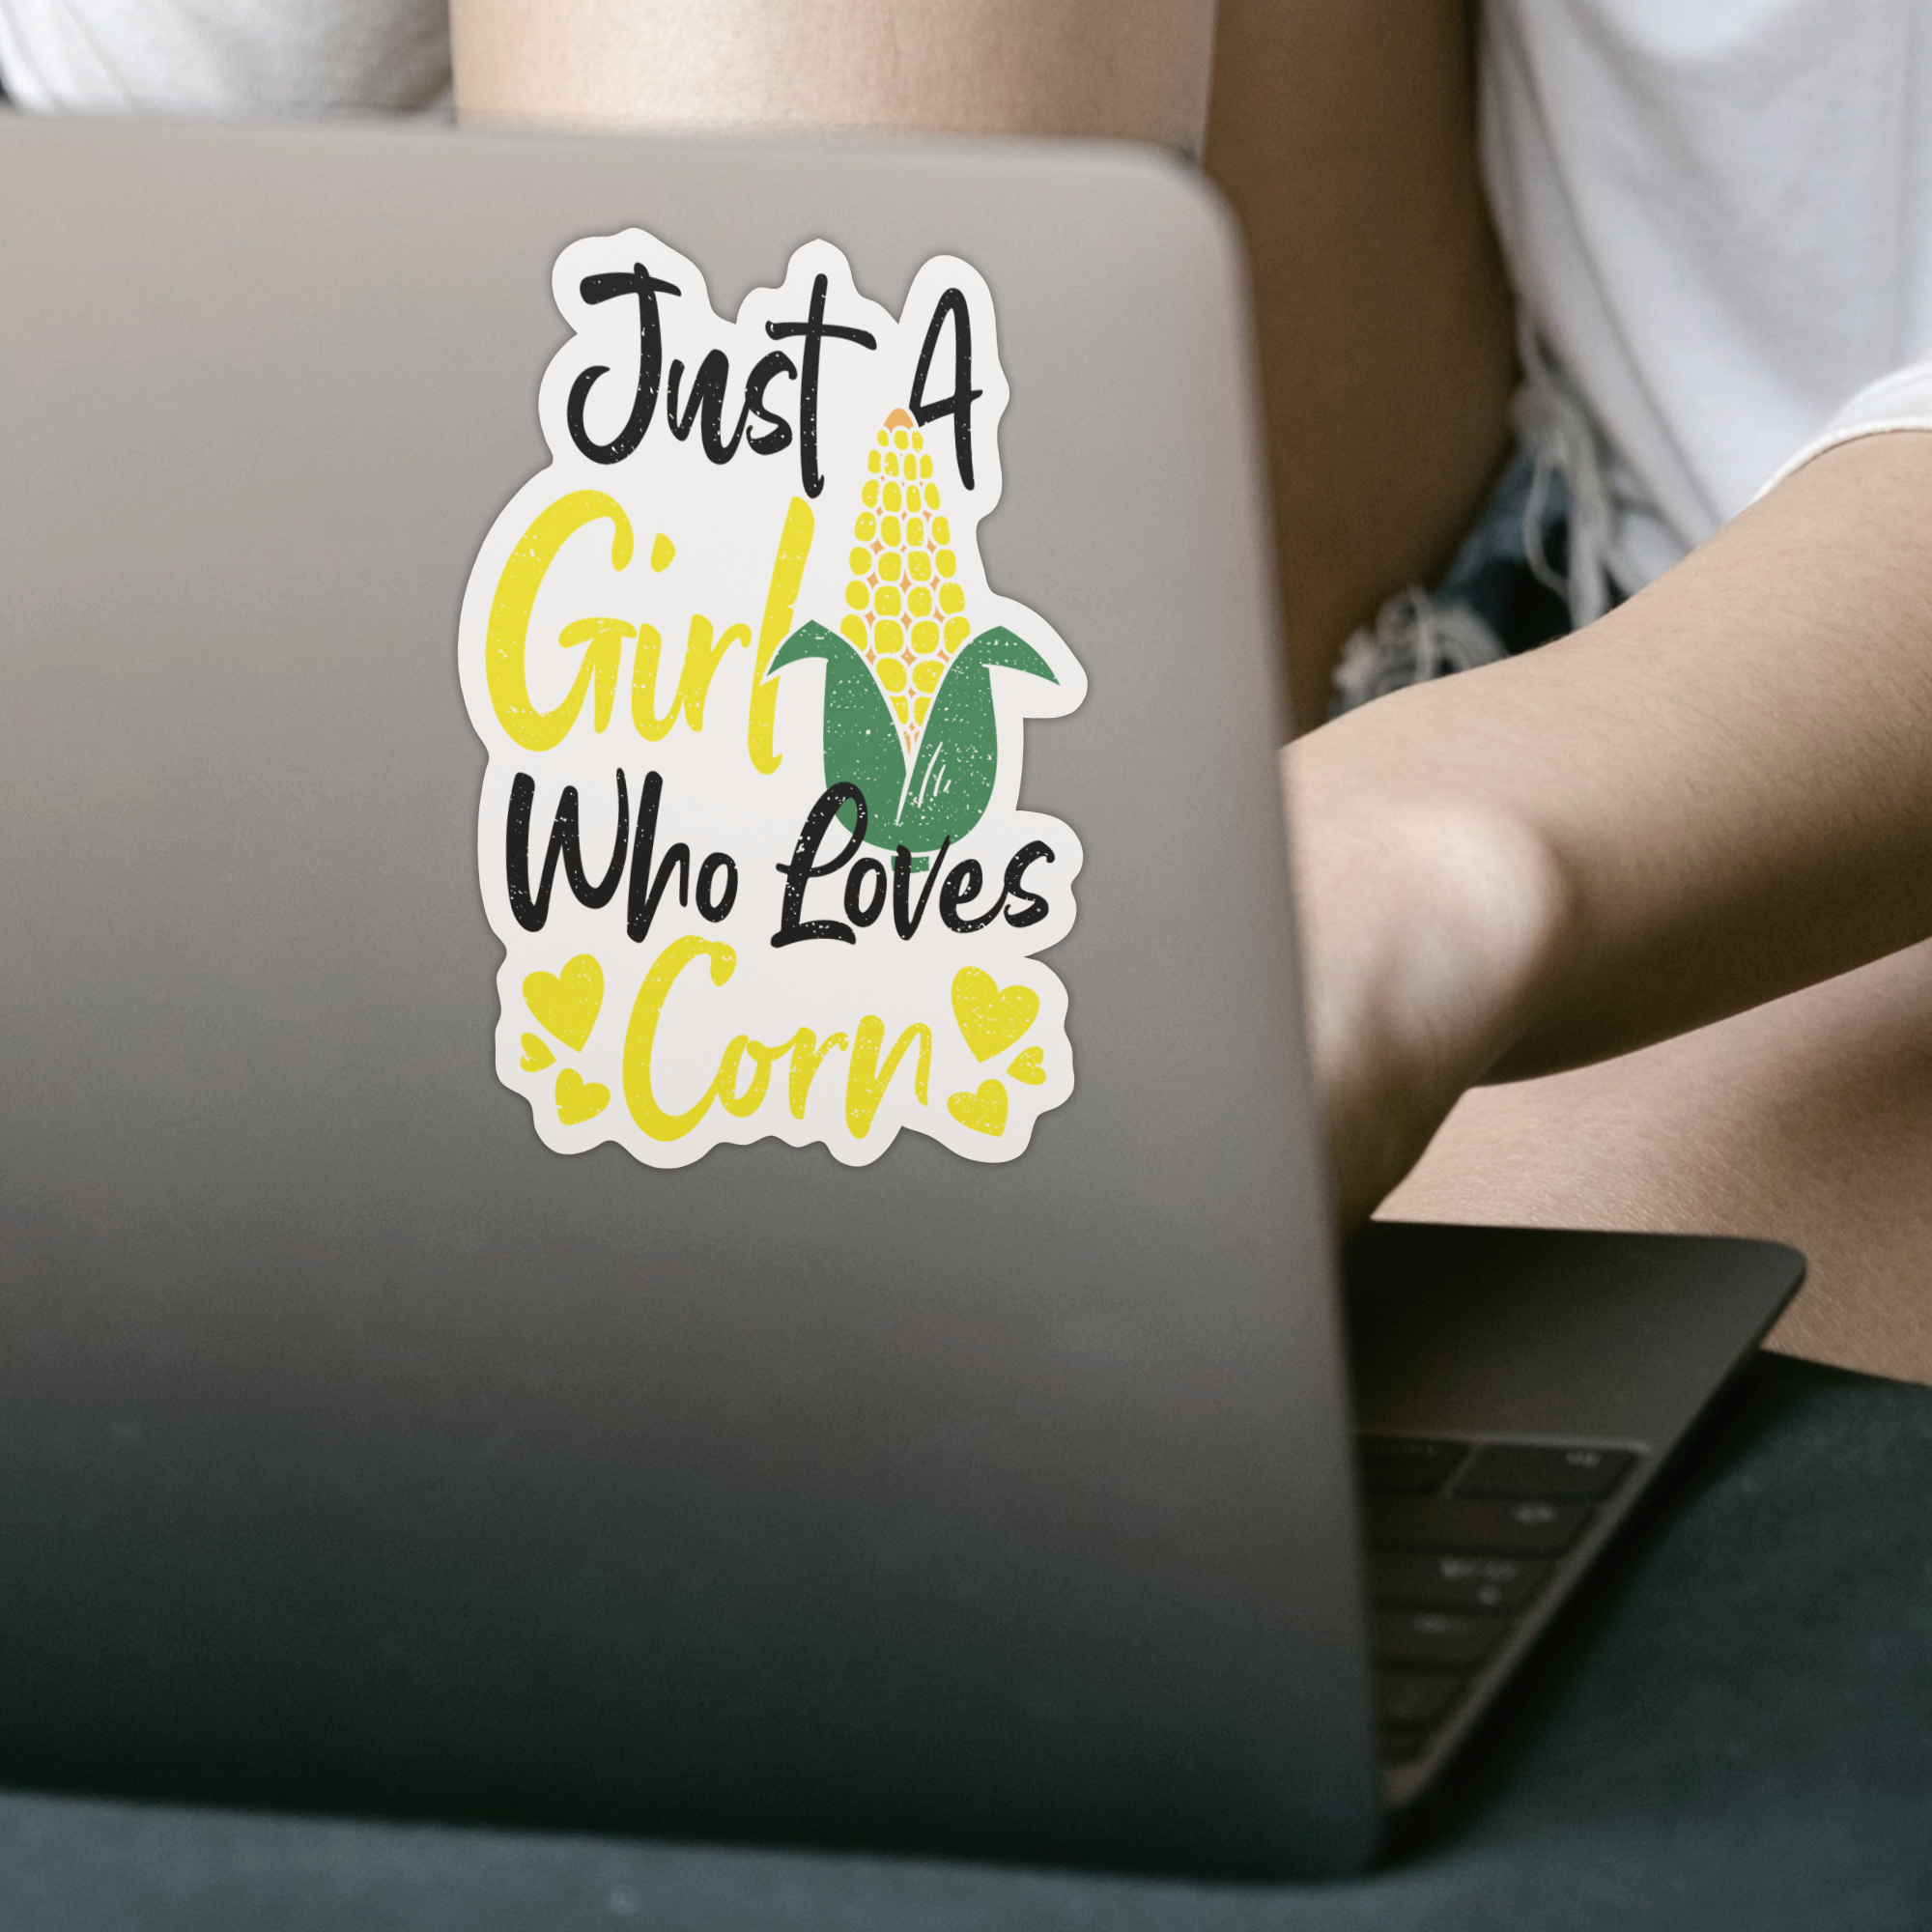 Just A Girl Who Loves Corn Sticker - DESIGNSBYJNK5.COM